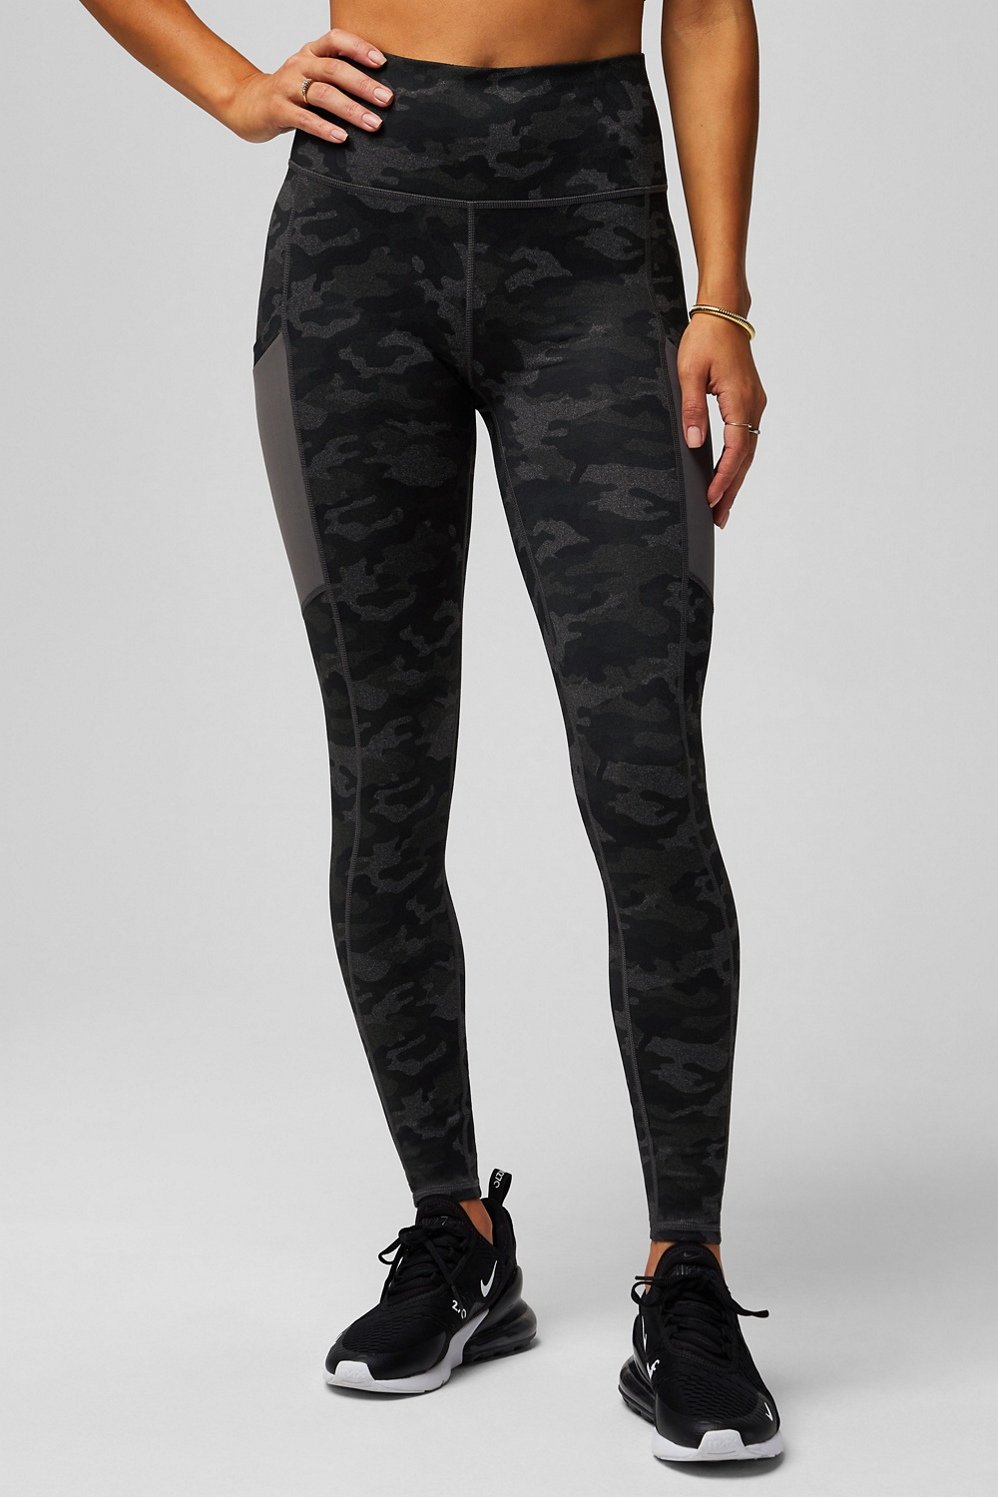 Travel Tights in Charcoal Denim